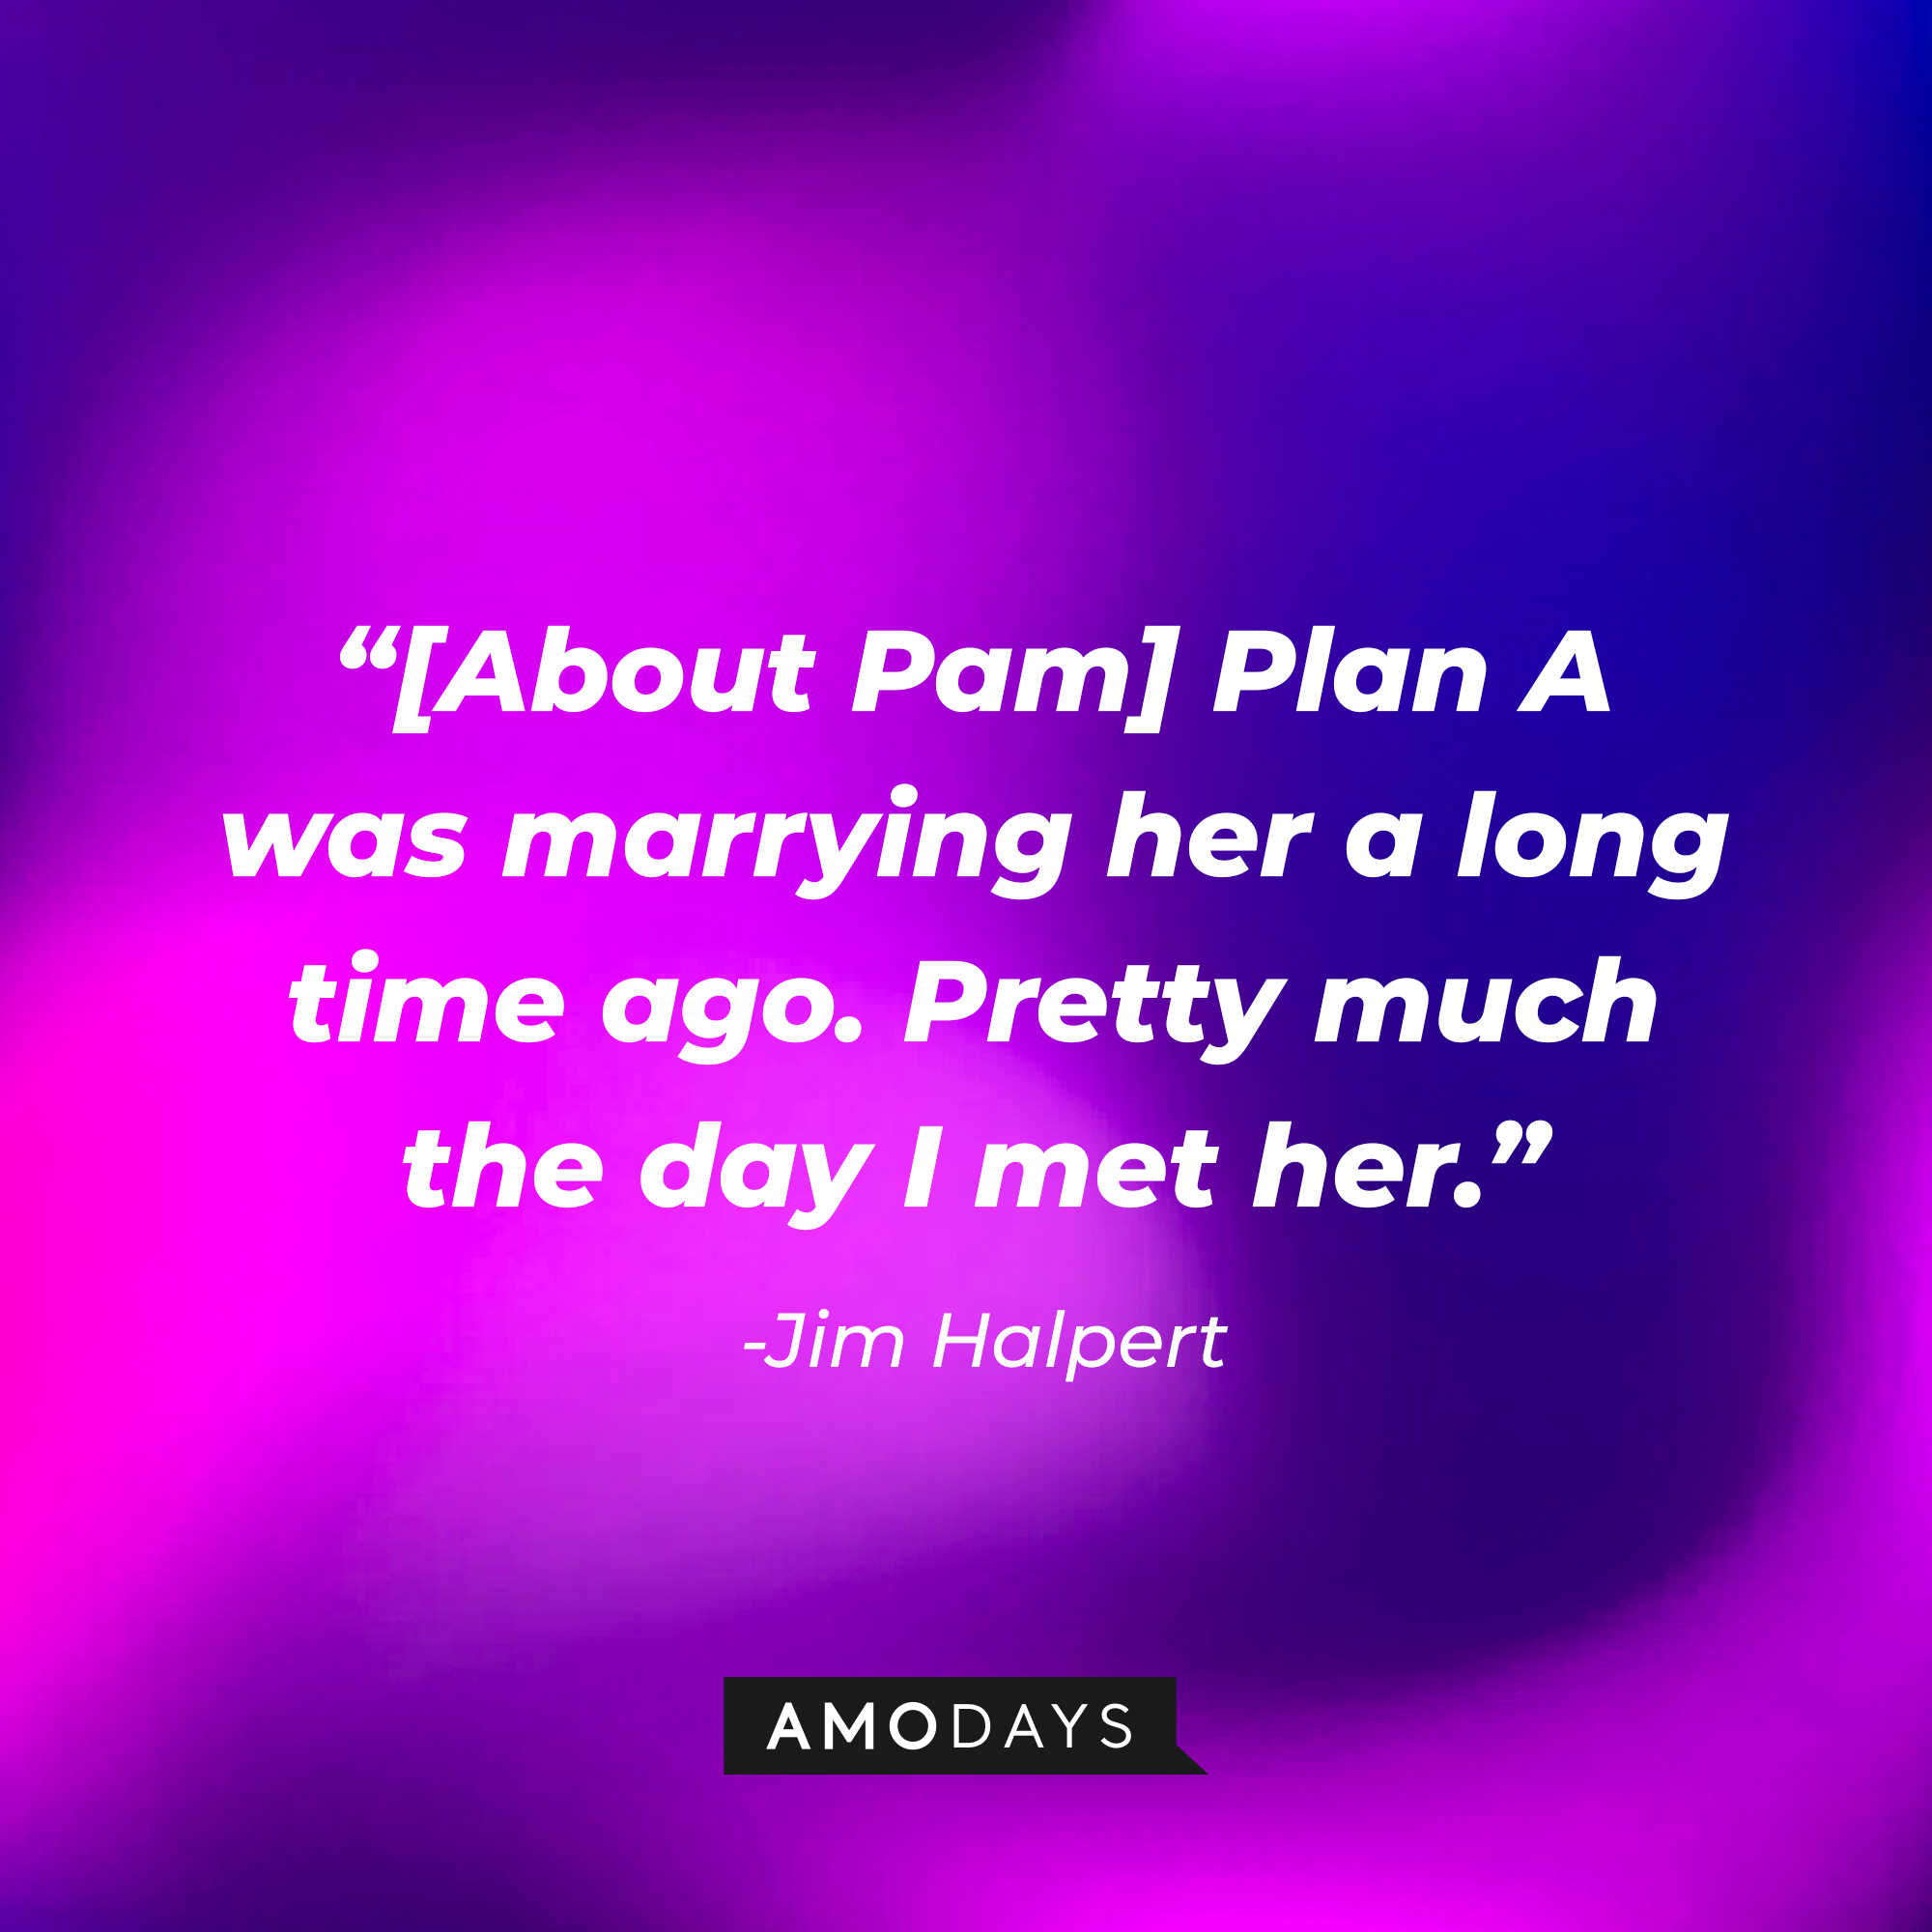 Jim Halpert’s quote: "[About Pam] Plan A was marrying her a long time ago. Pretty much the day I met her." | Source: AmoDays